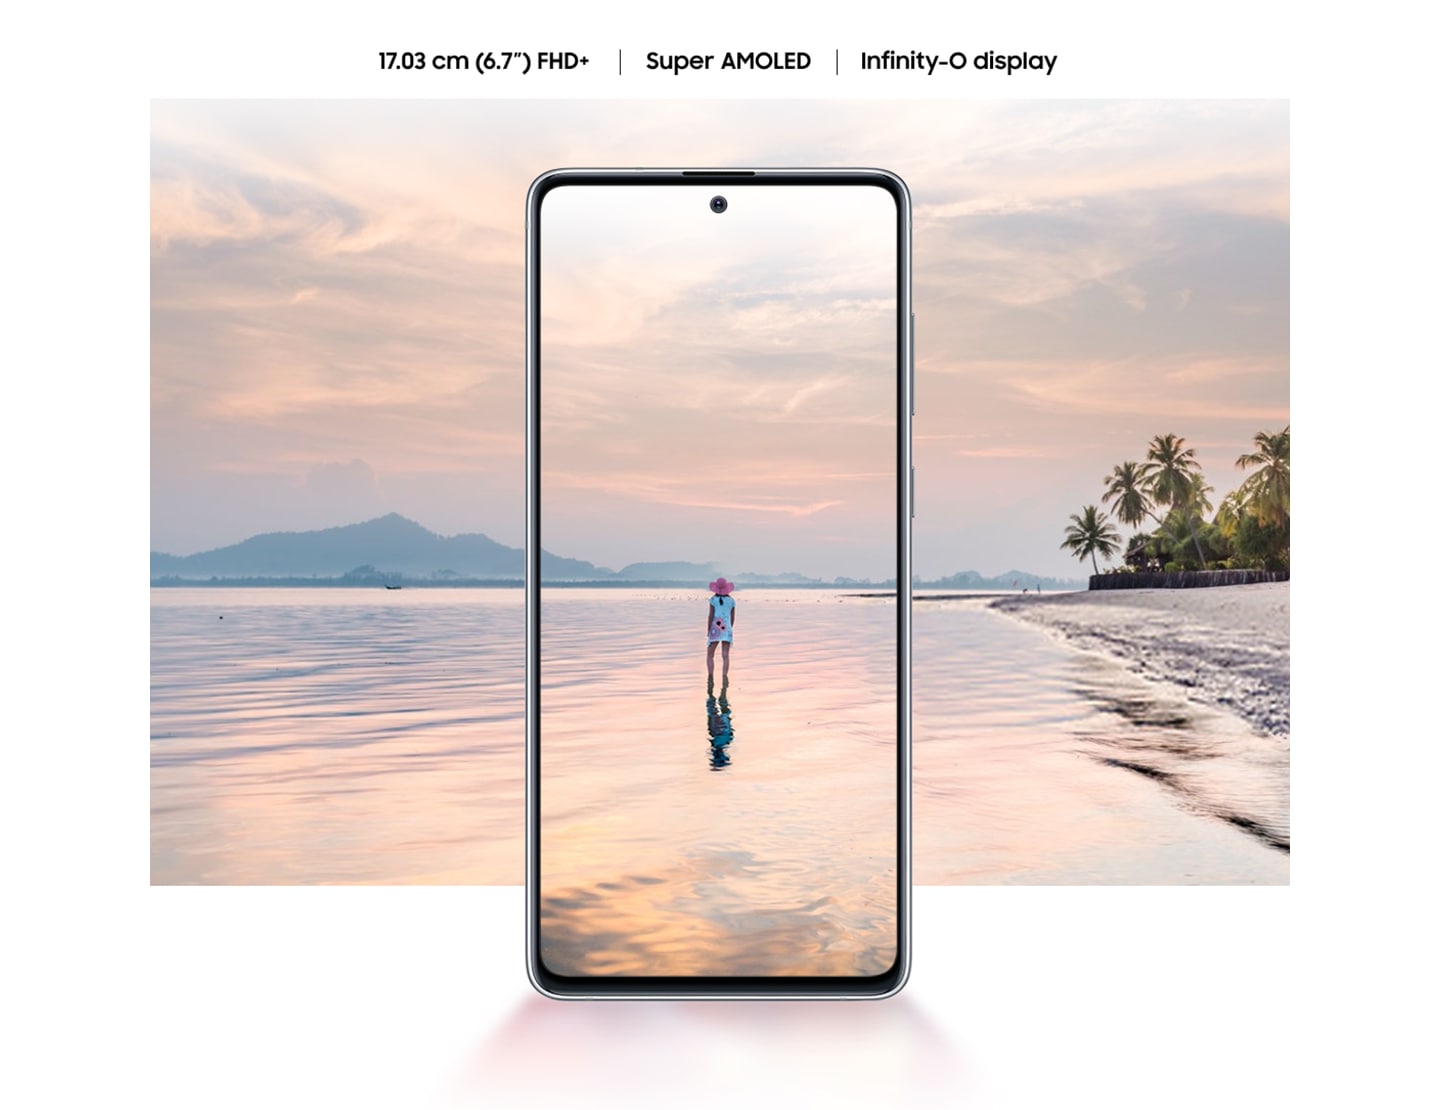 Samsung Galaxy Note10 Lite - Camera Features & Specifications - front camera, rear camera, cinematic screen and Infinity-O Display features.